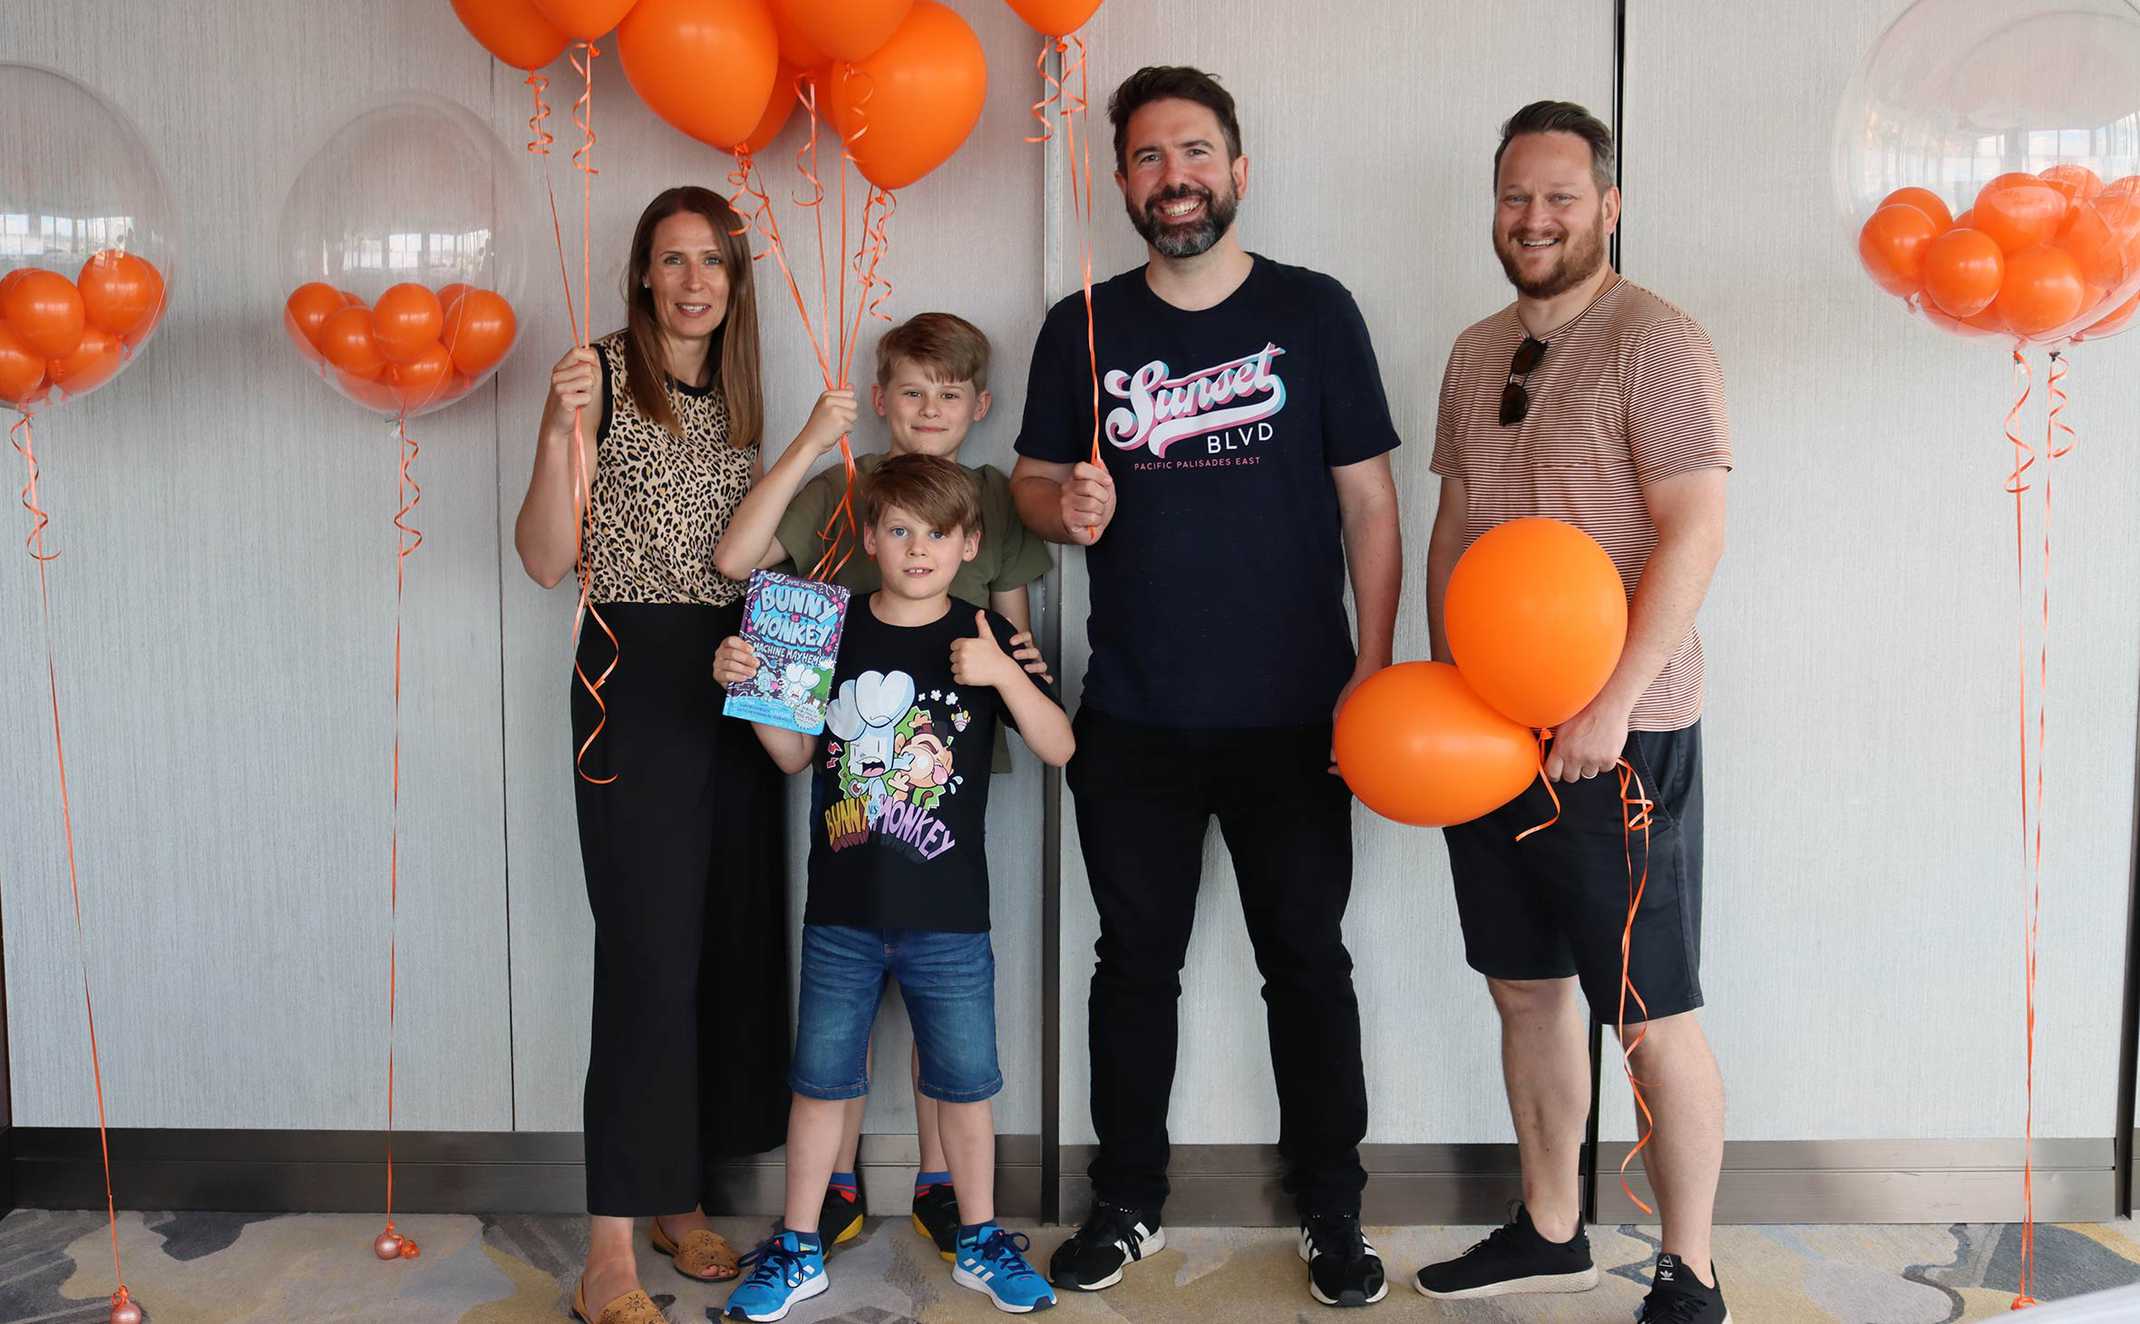 Clark and his family with Jamie, surrounded by bright orange balloons.